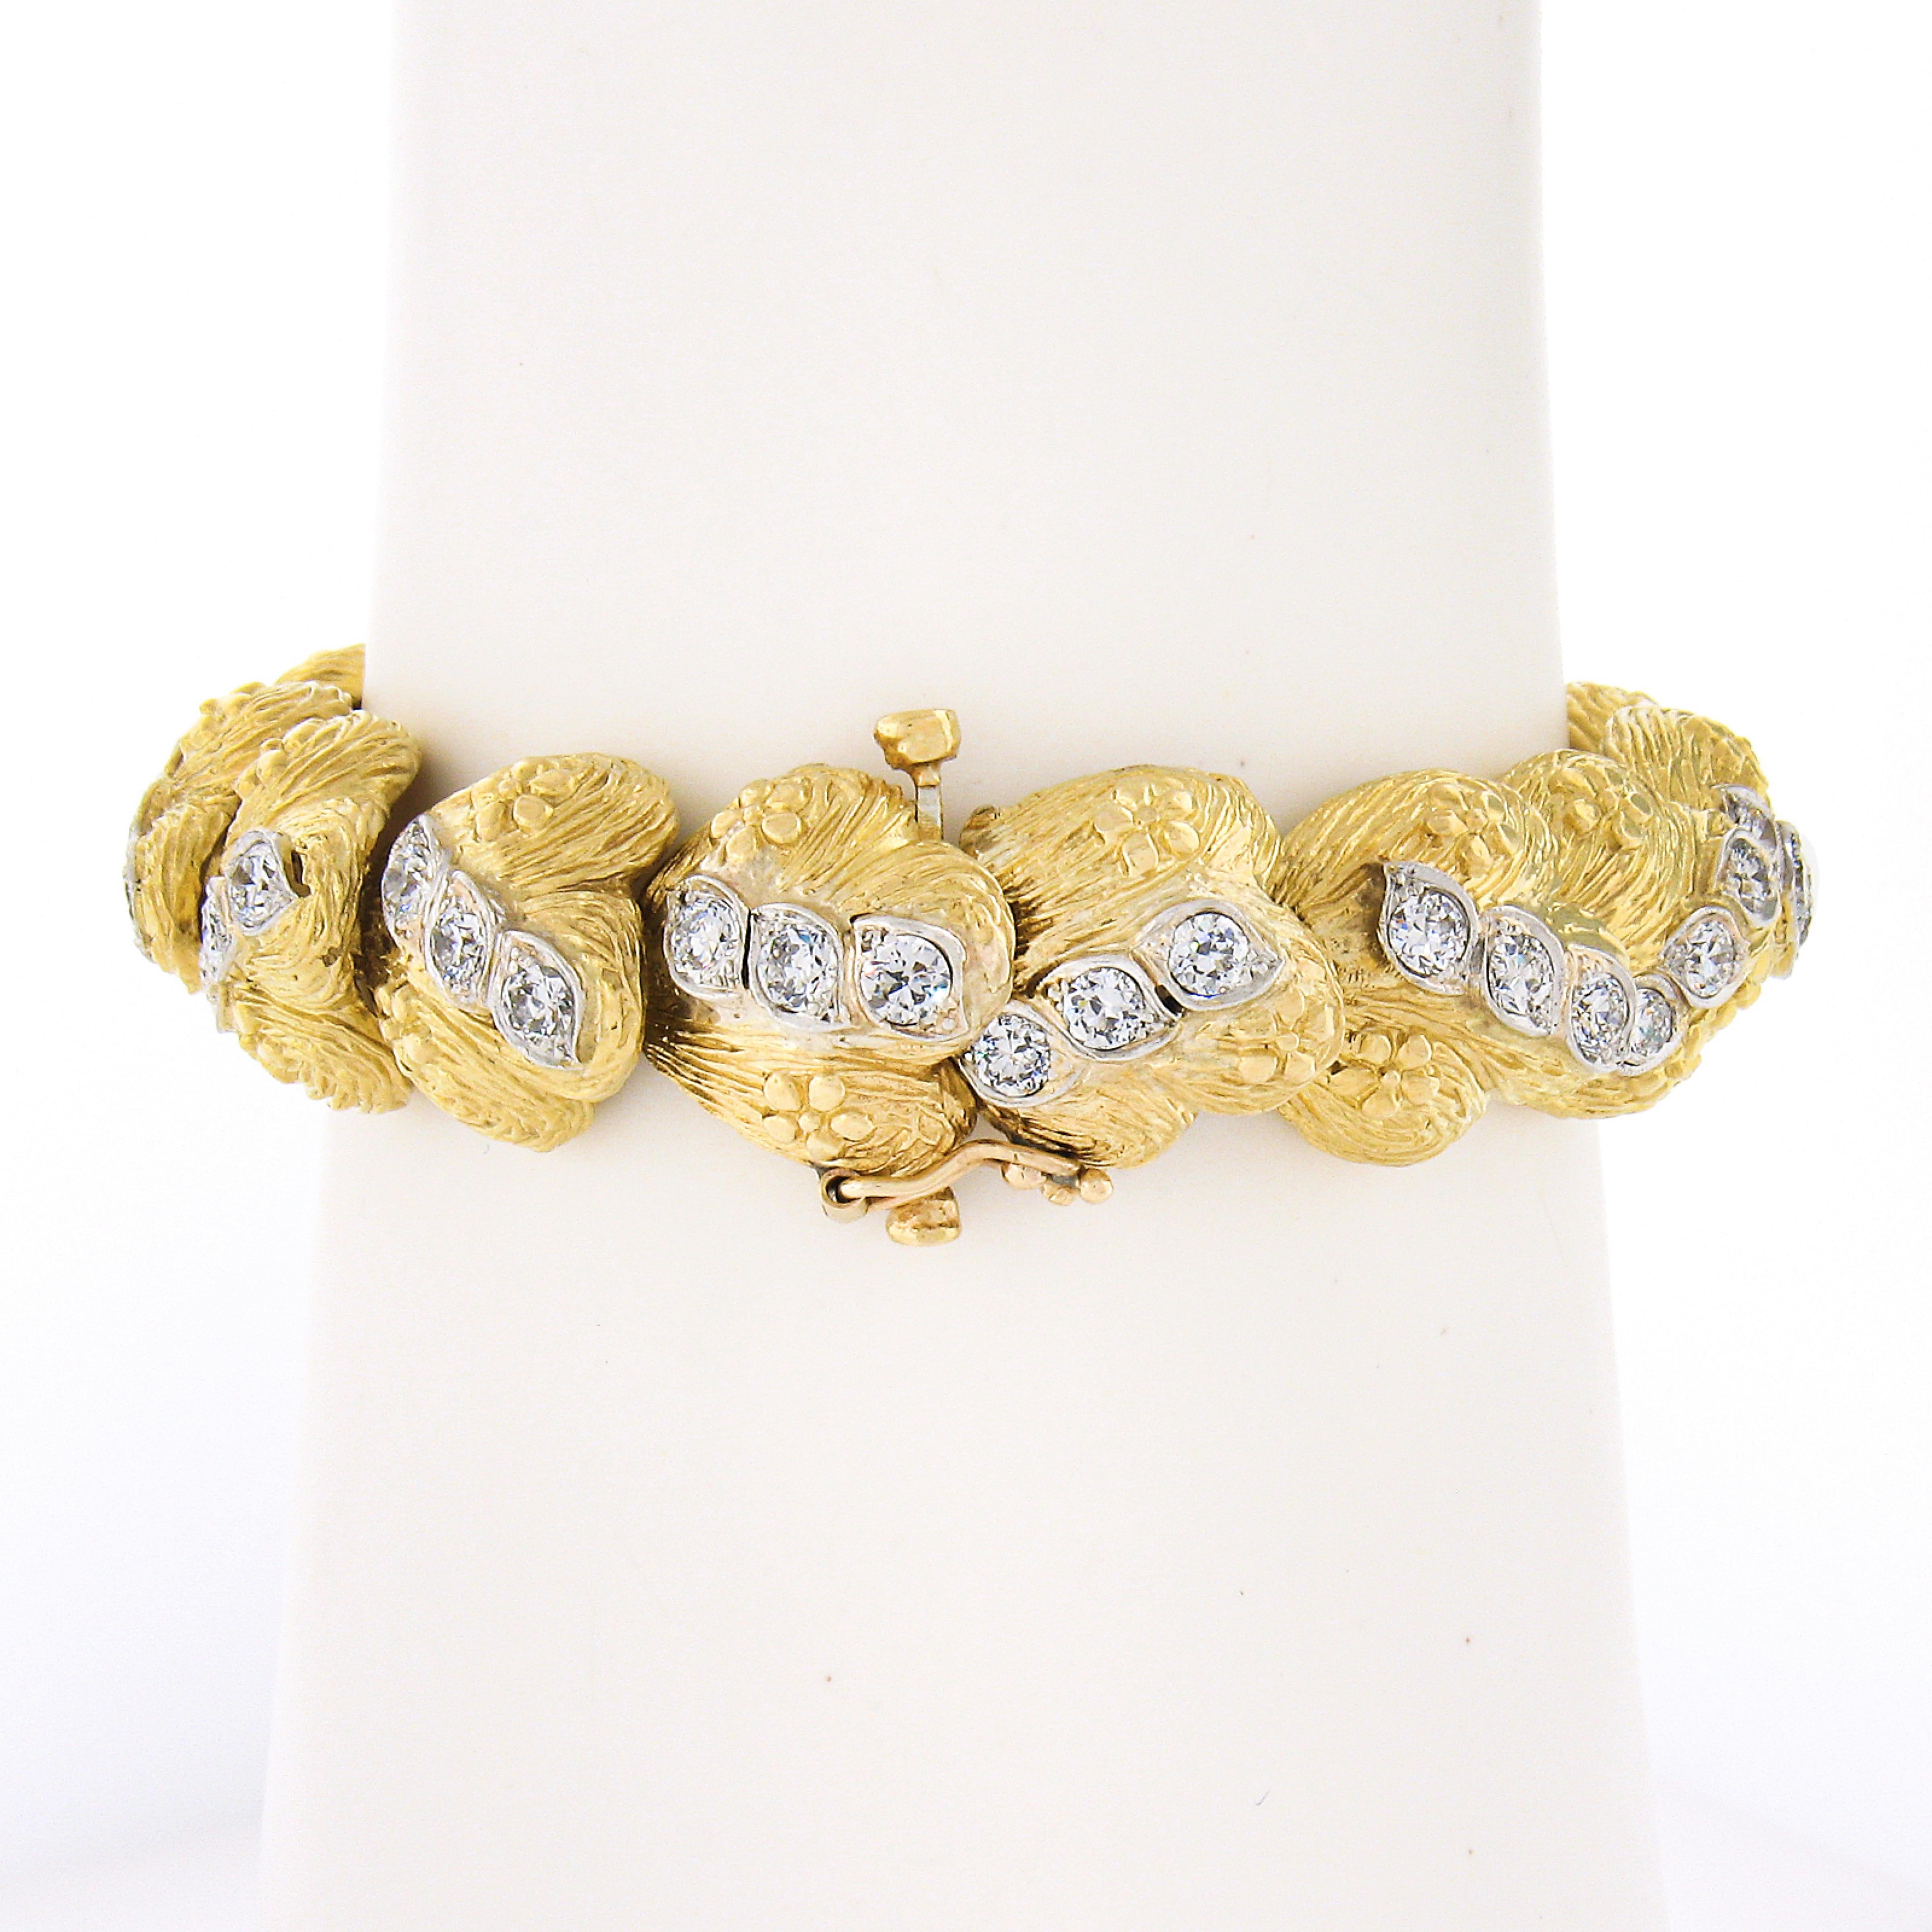 This stunning and solidly made vintage statement bracelet is crafted in solid 18k yellow gold features a uniquely designed links that are set with approximately 5 carats of fine quality old European and transitional cut diamonds throughout. These